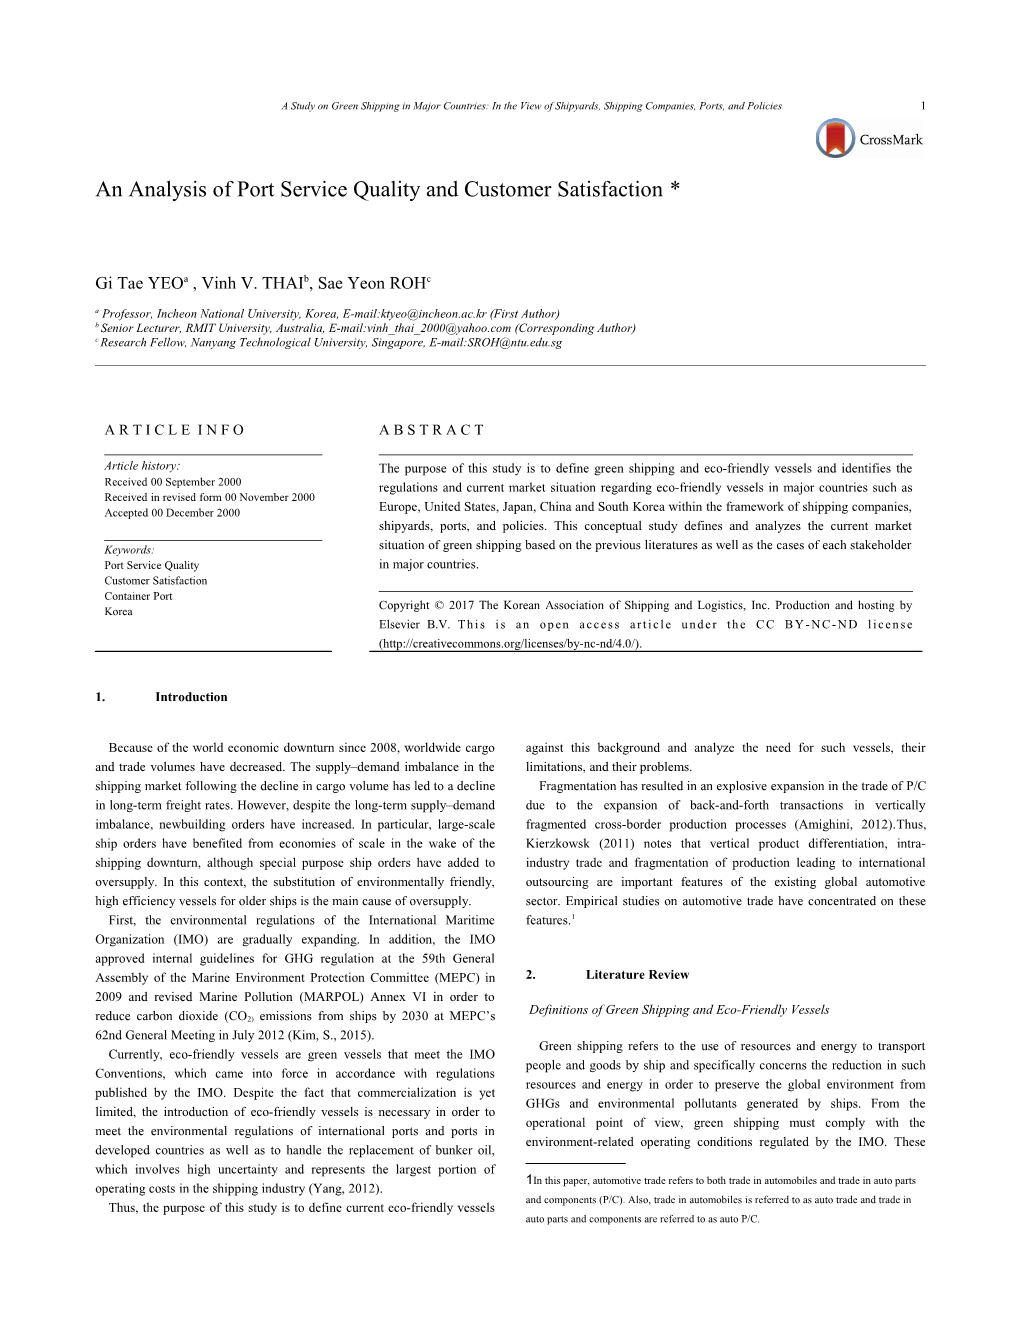 An Analysis of Port Service Quality and Customer Satisfaction*